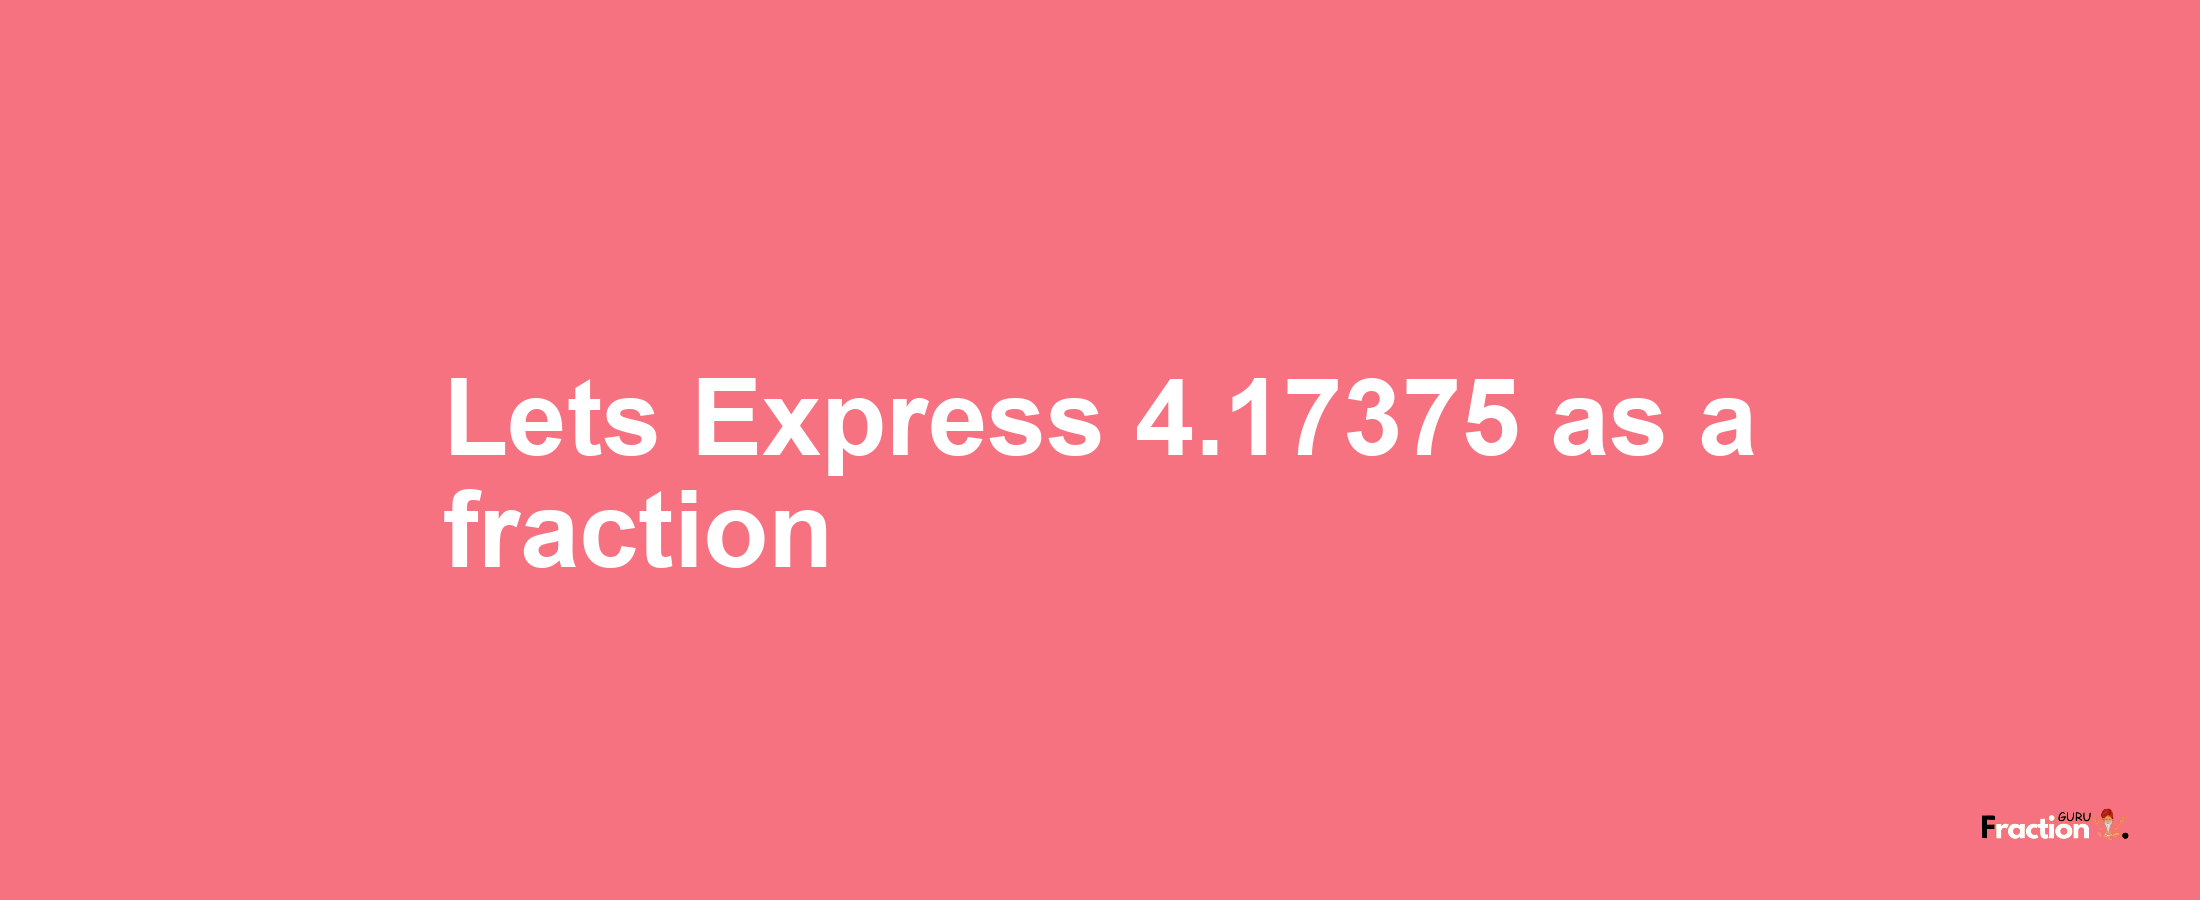 Lets Express 4.17375 as afraction